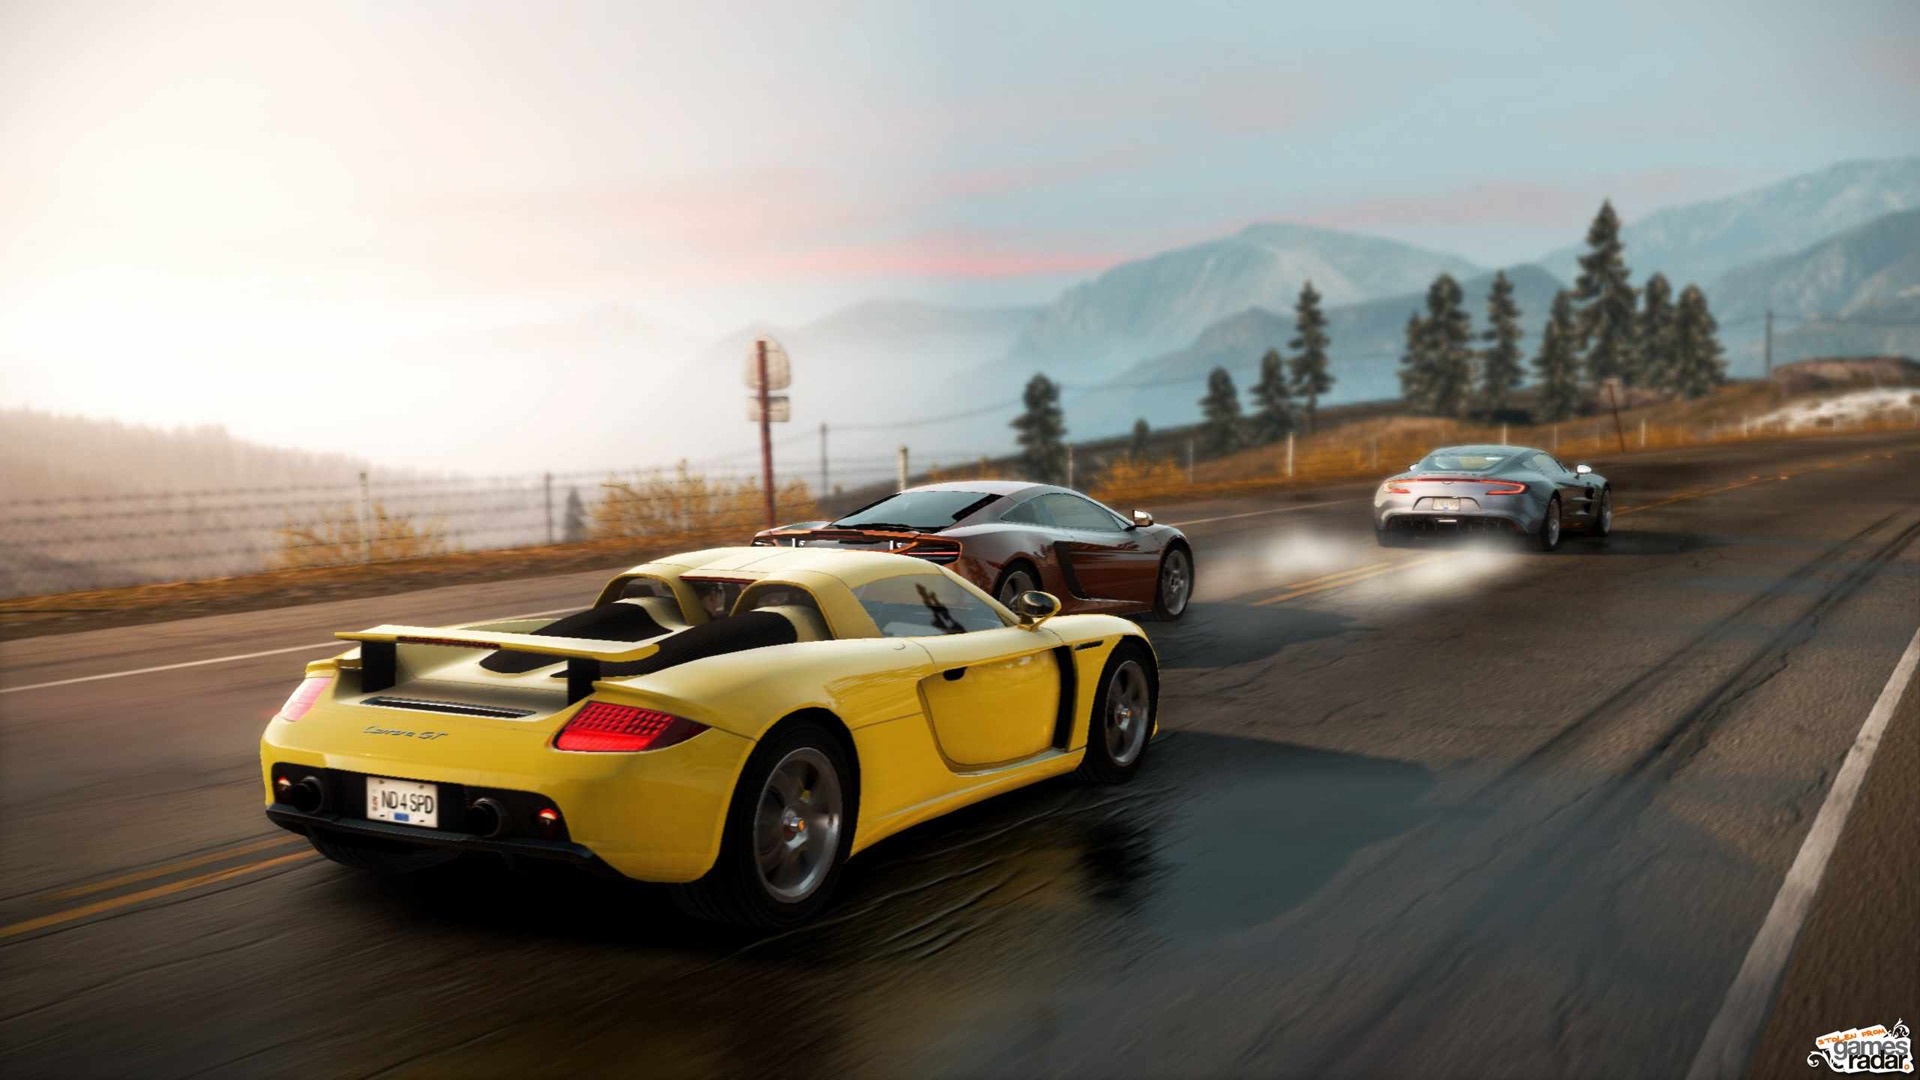 Need for Speed: Hot Pursuit 极品飞车14：热力追踪6 - 1920x1080